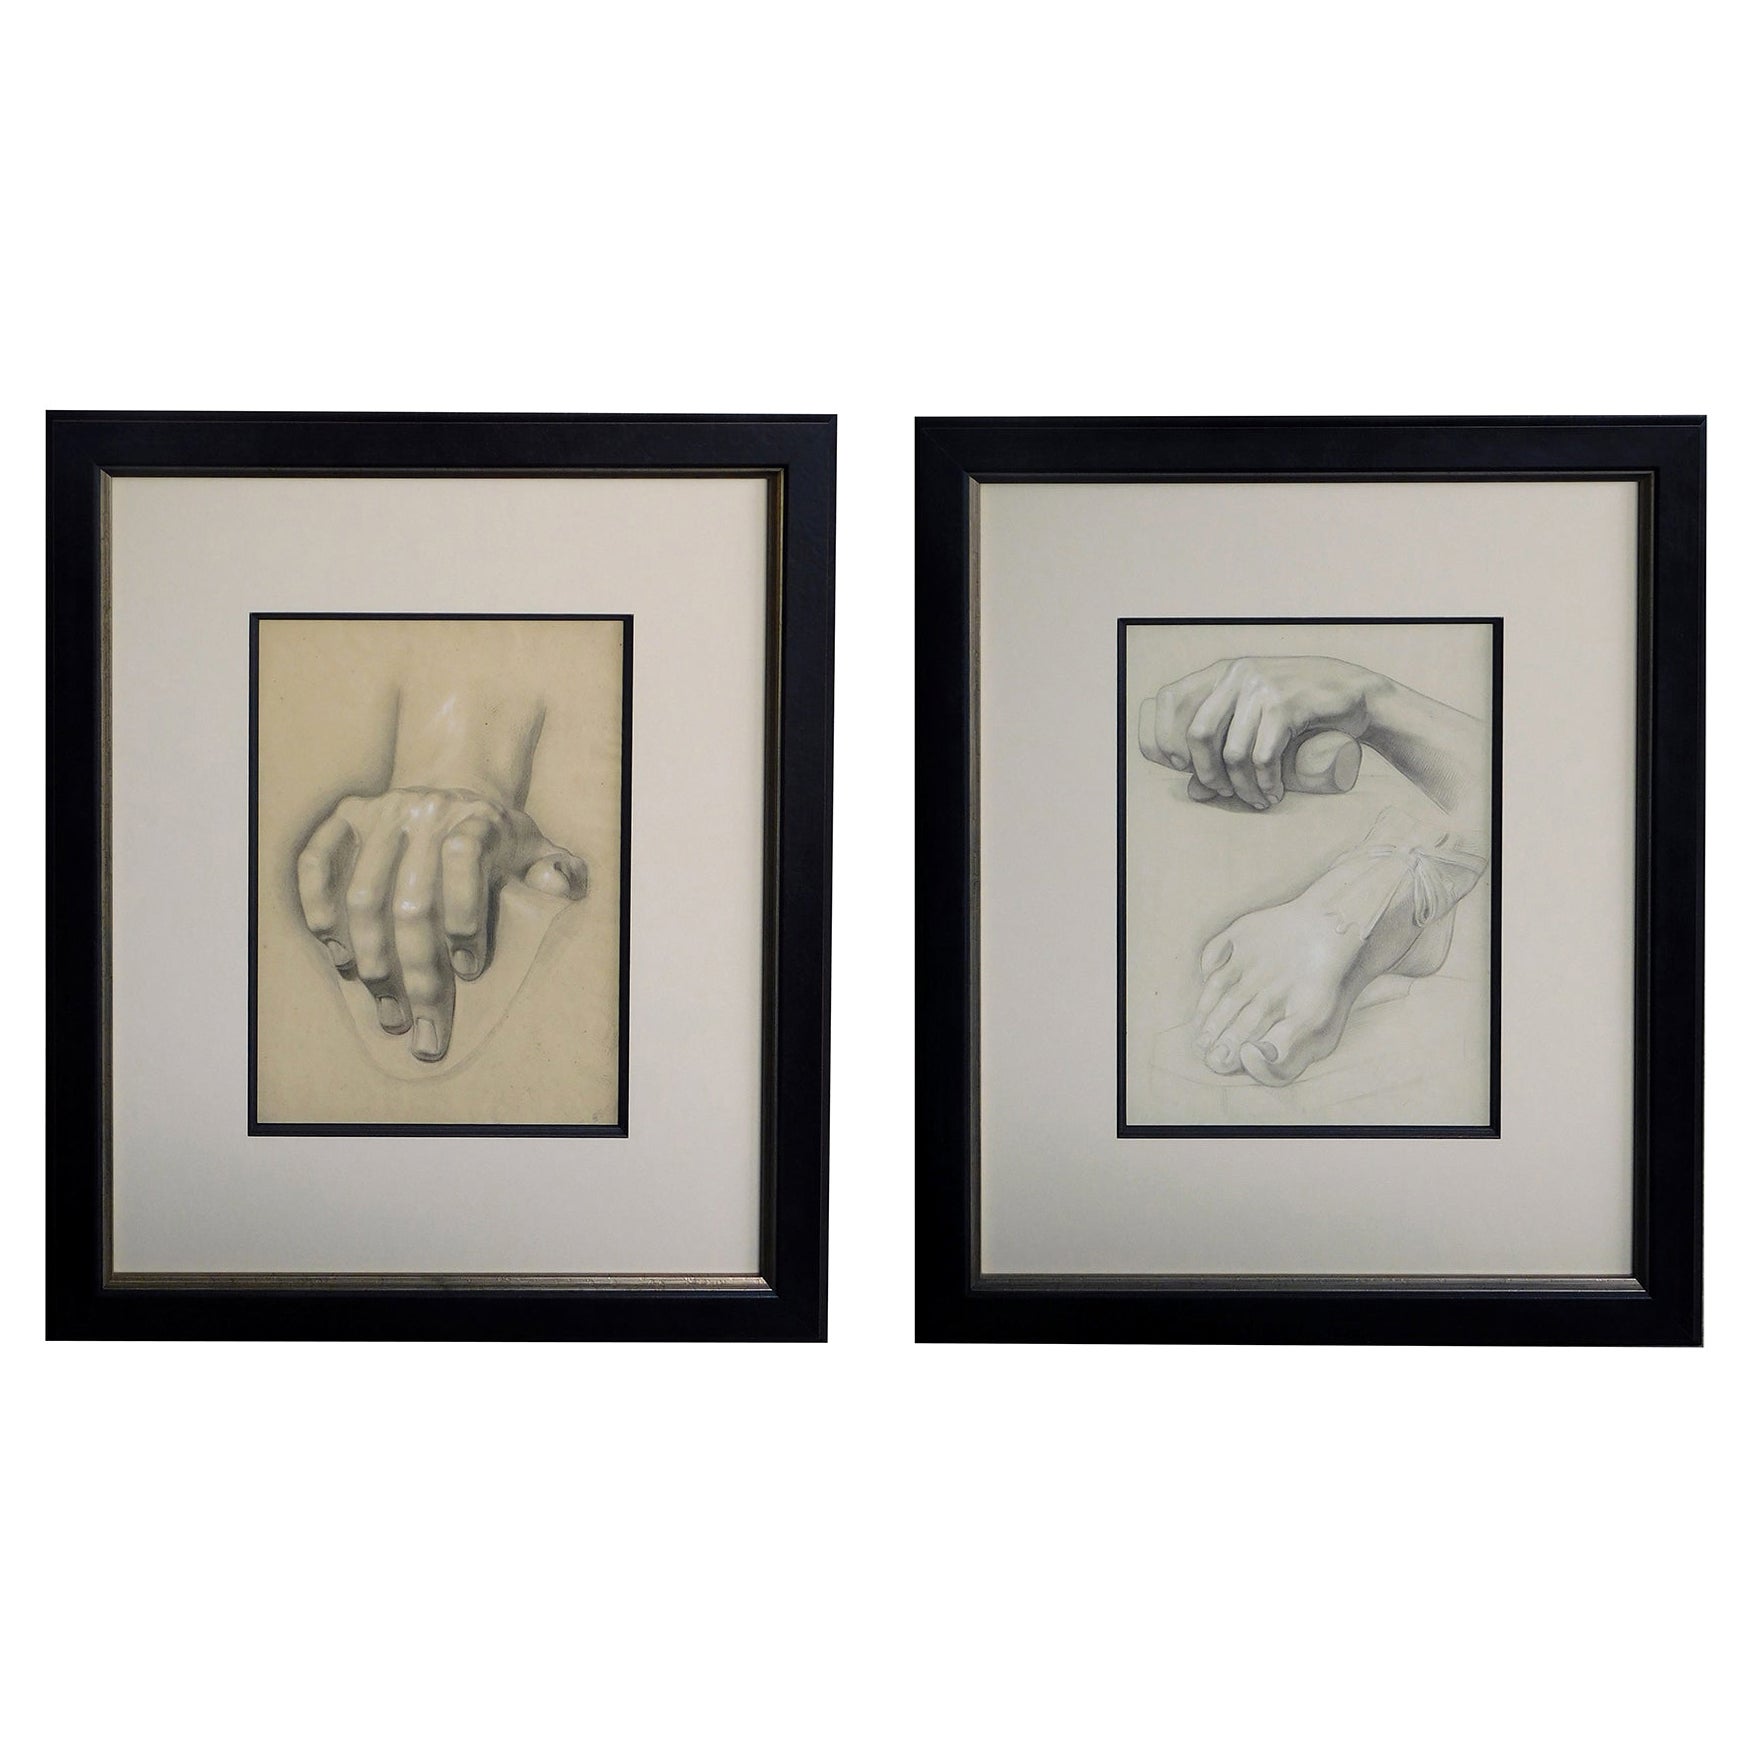 Graphite on Paper Two Artist Studies of Hands and Extended Foot